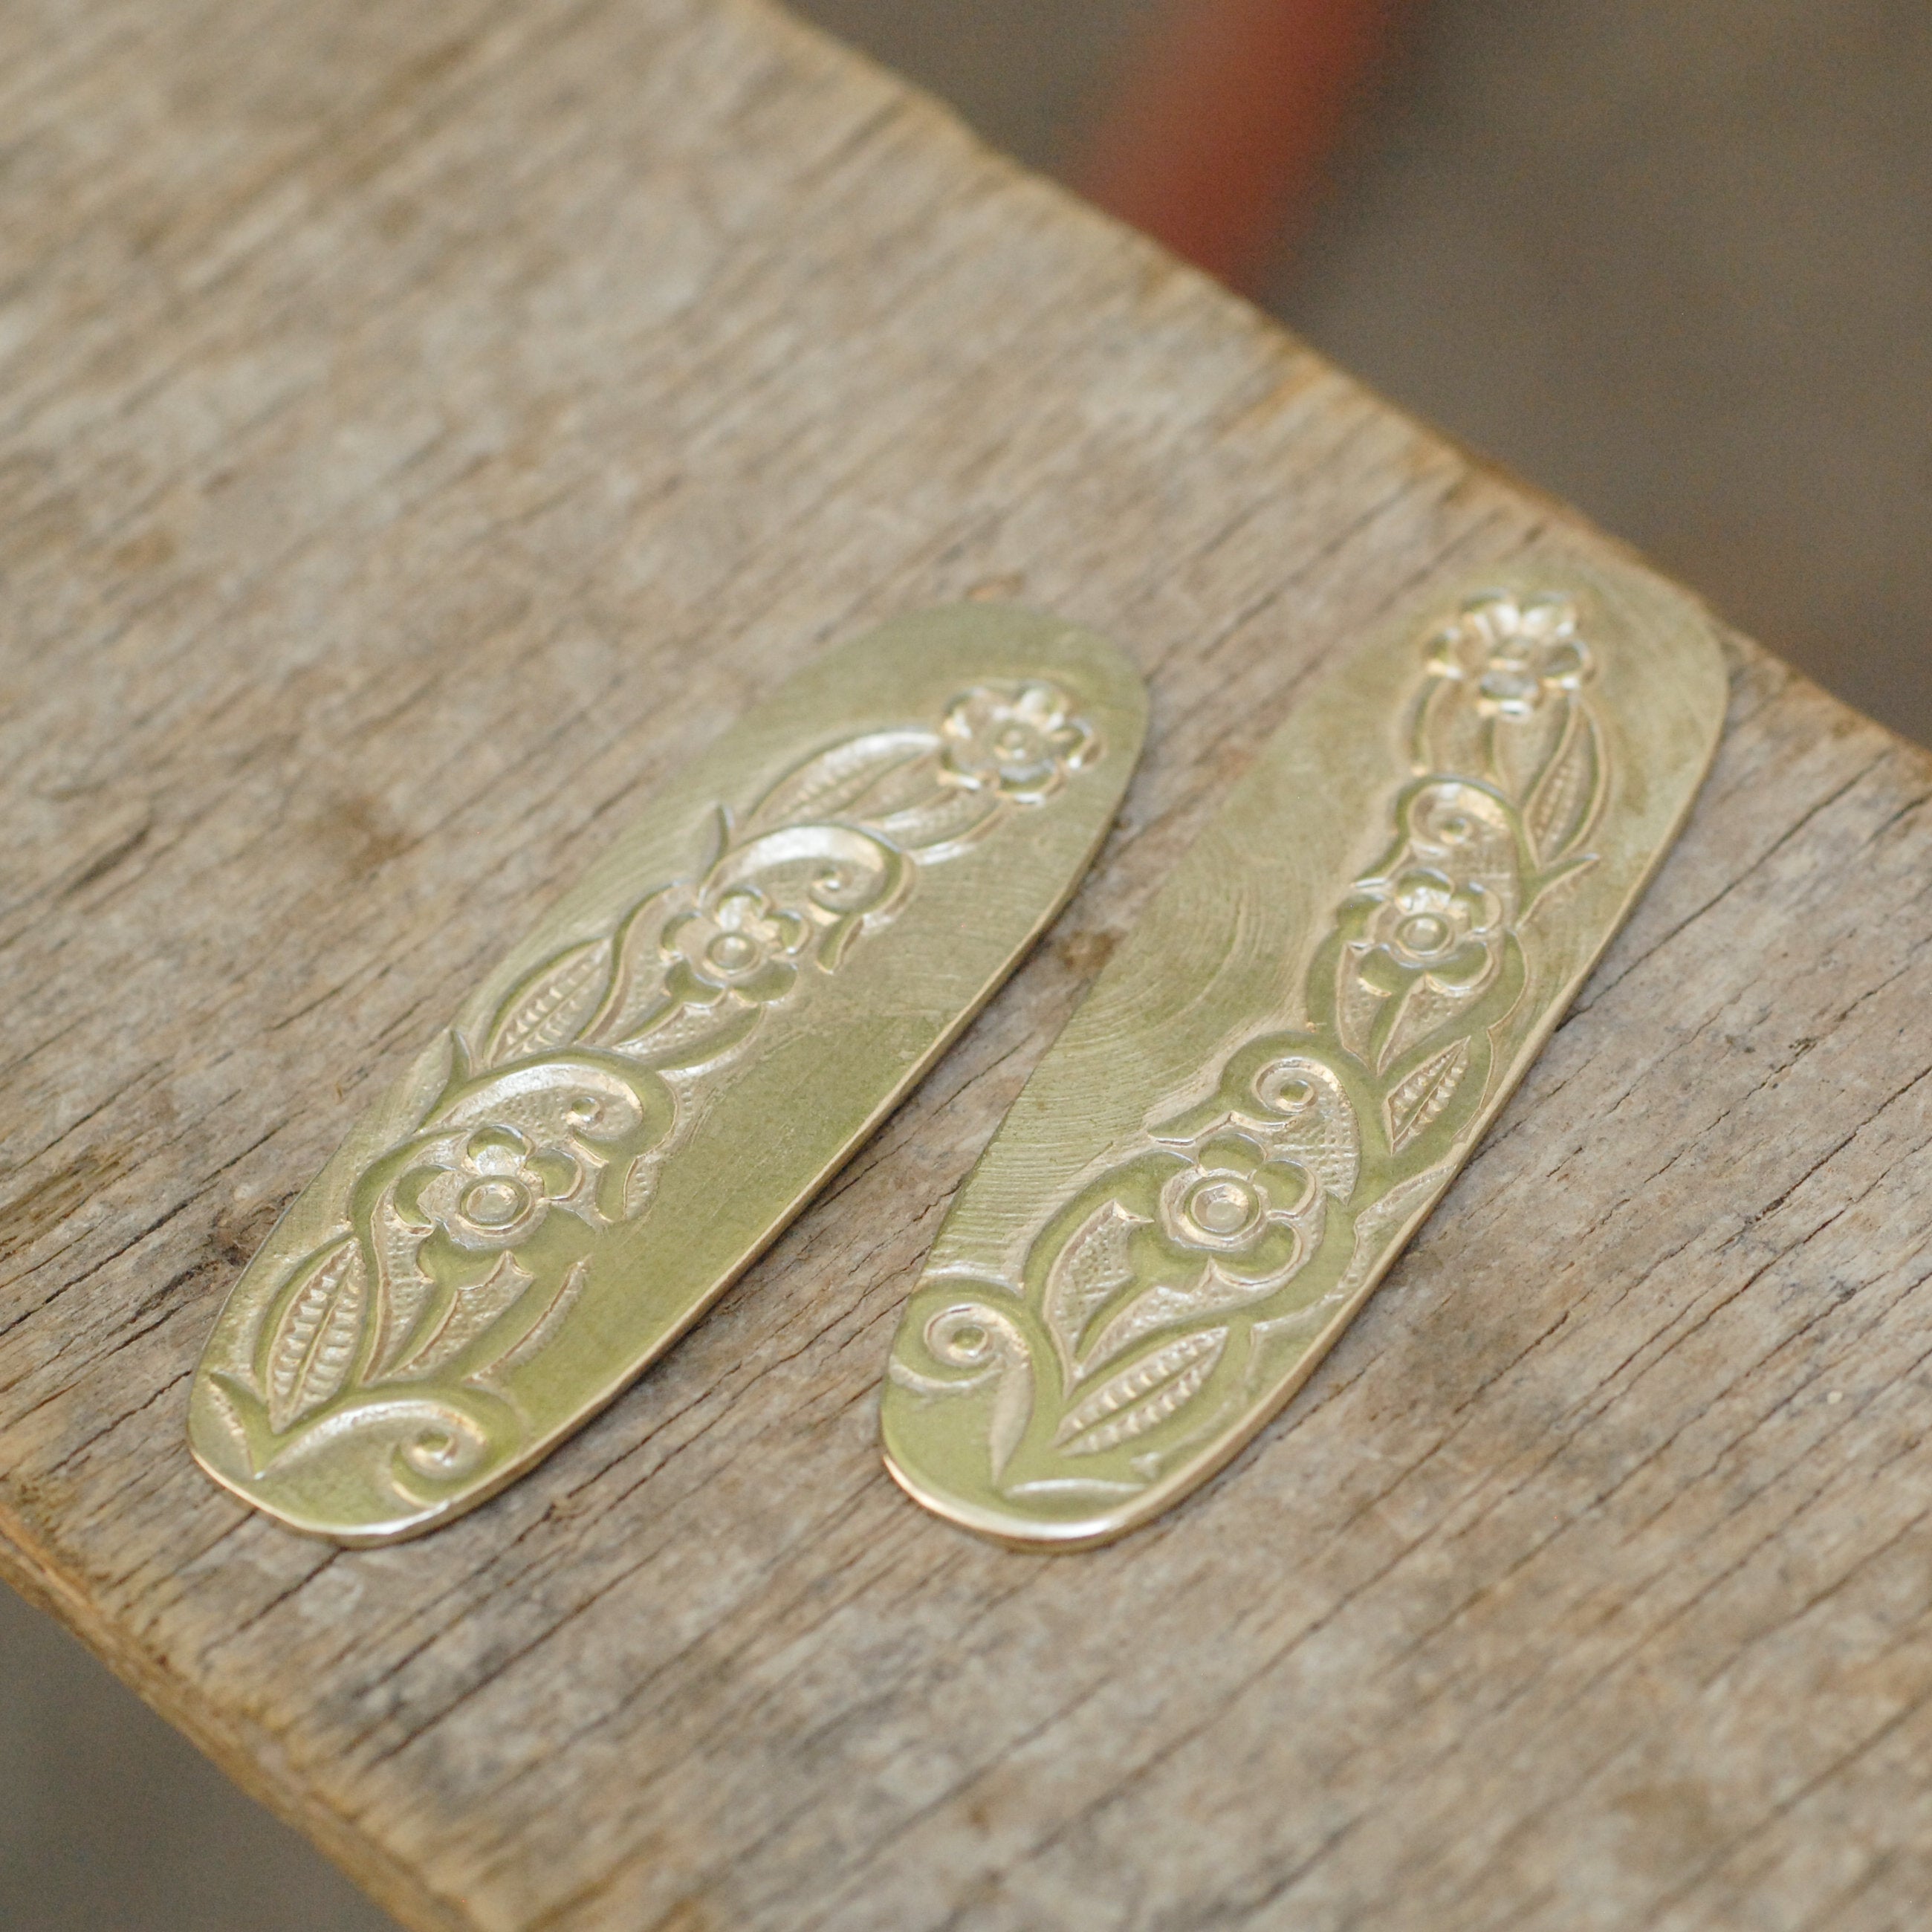 Organic oval shapes w/ floral texture metal blanks - Nickel mexican silver